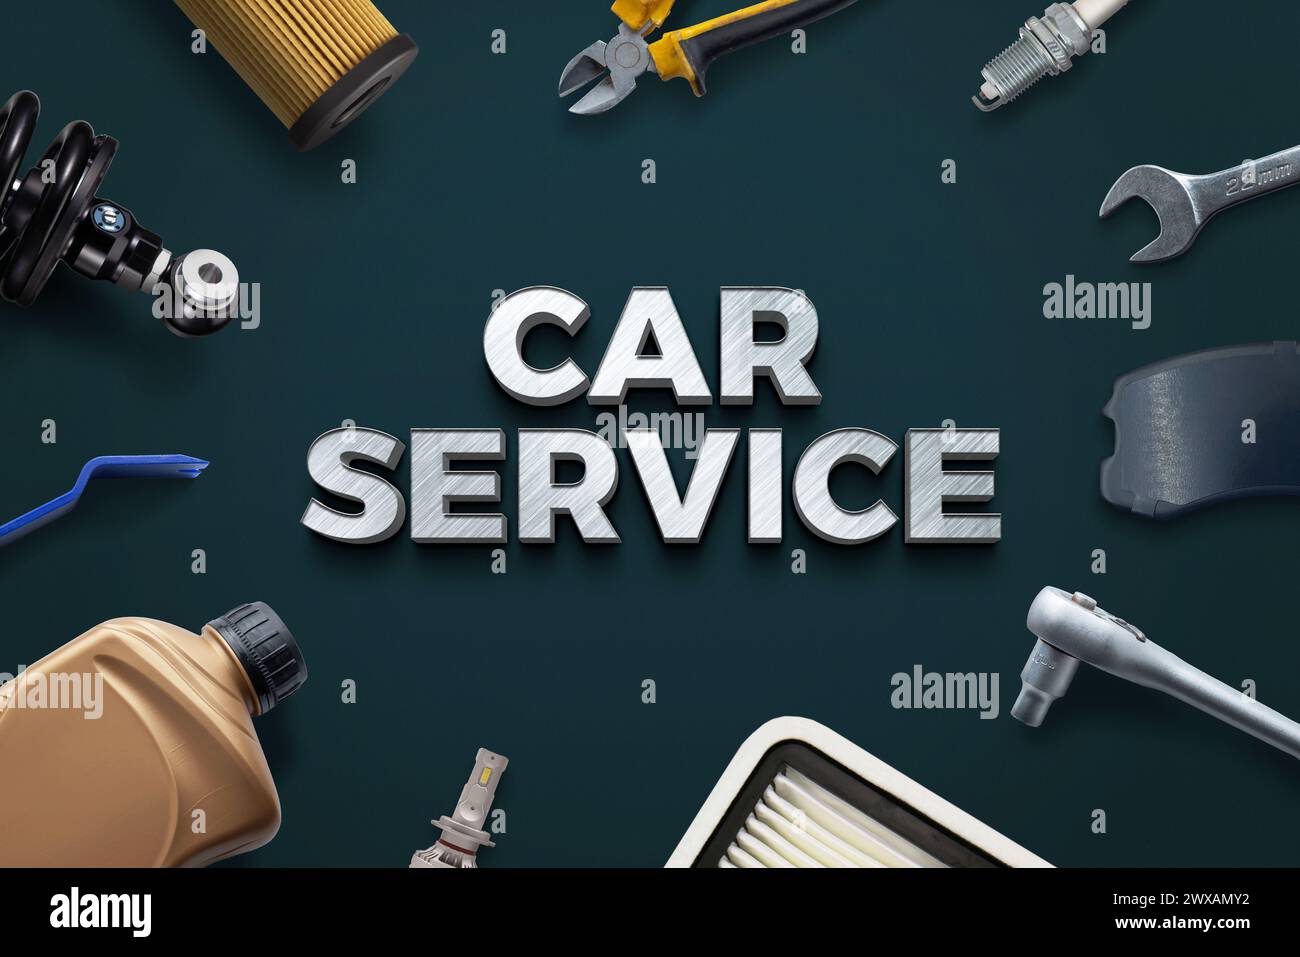 Metal Car Service' text surrounded by car parts: oil filter, oil can, LED bulb, air filter, brake pads, shock absorber, and tools Stock Photo